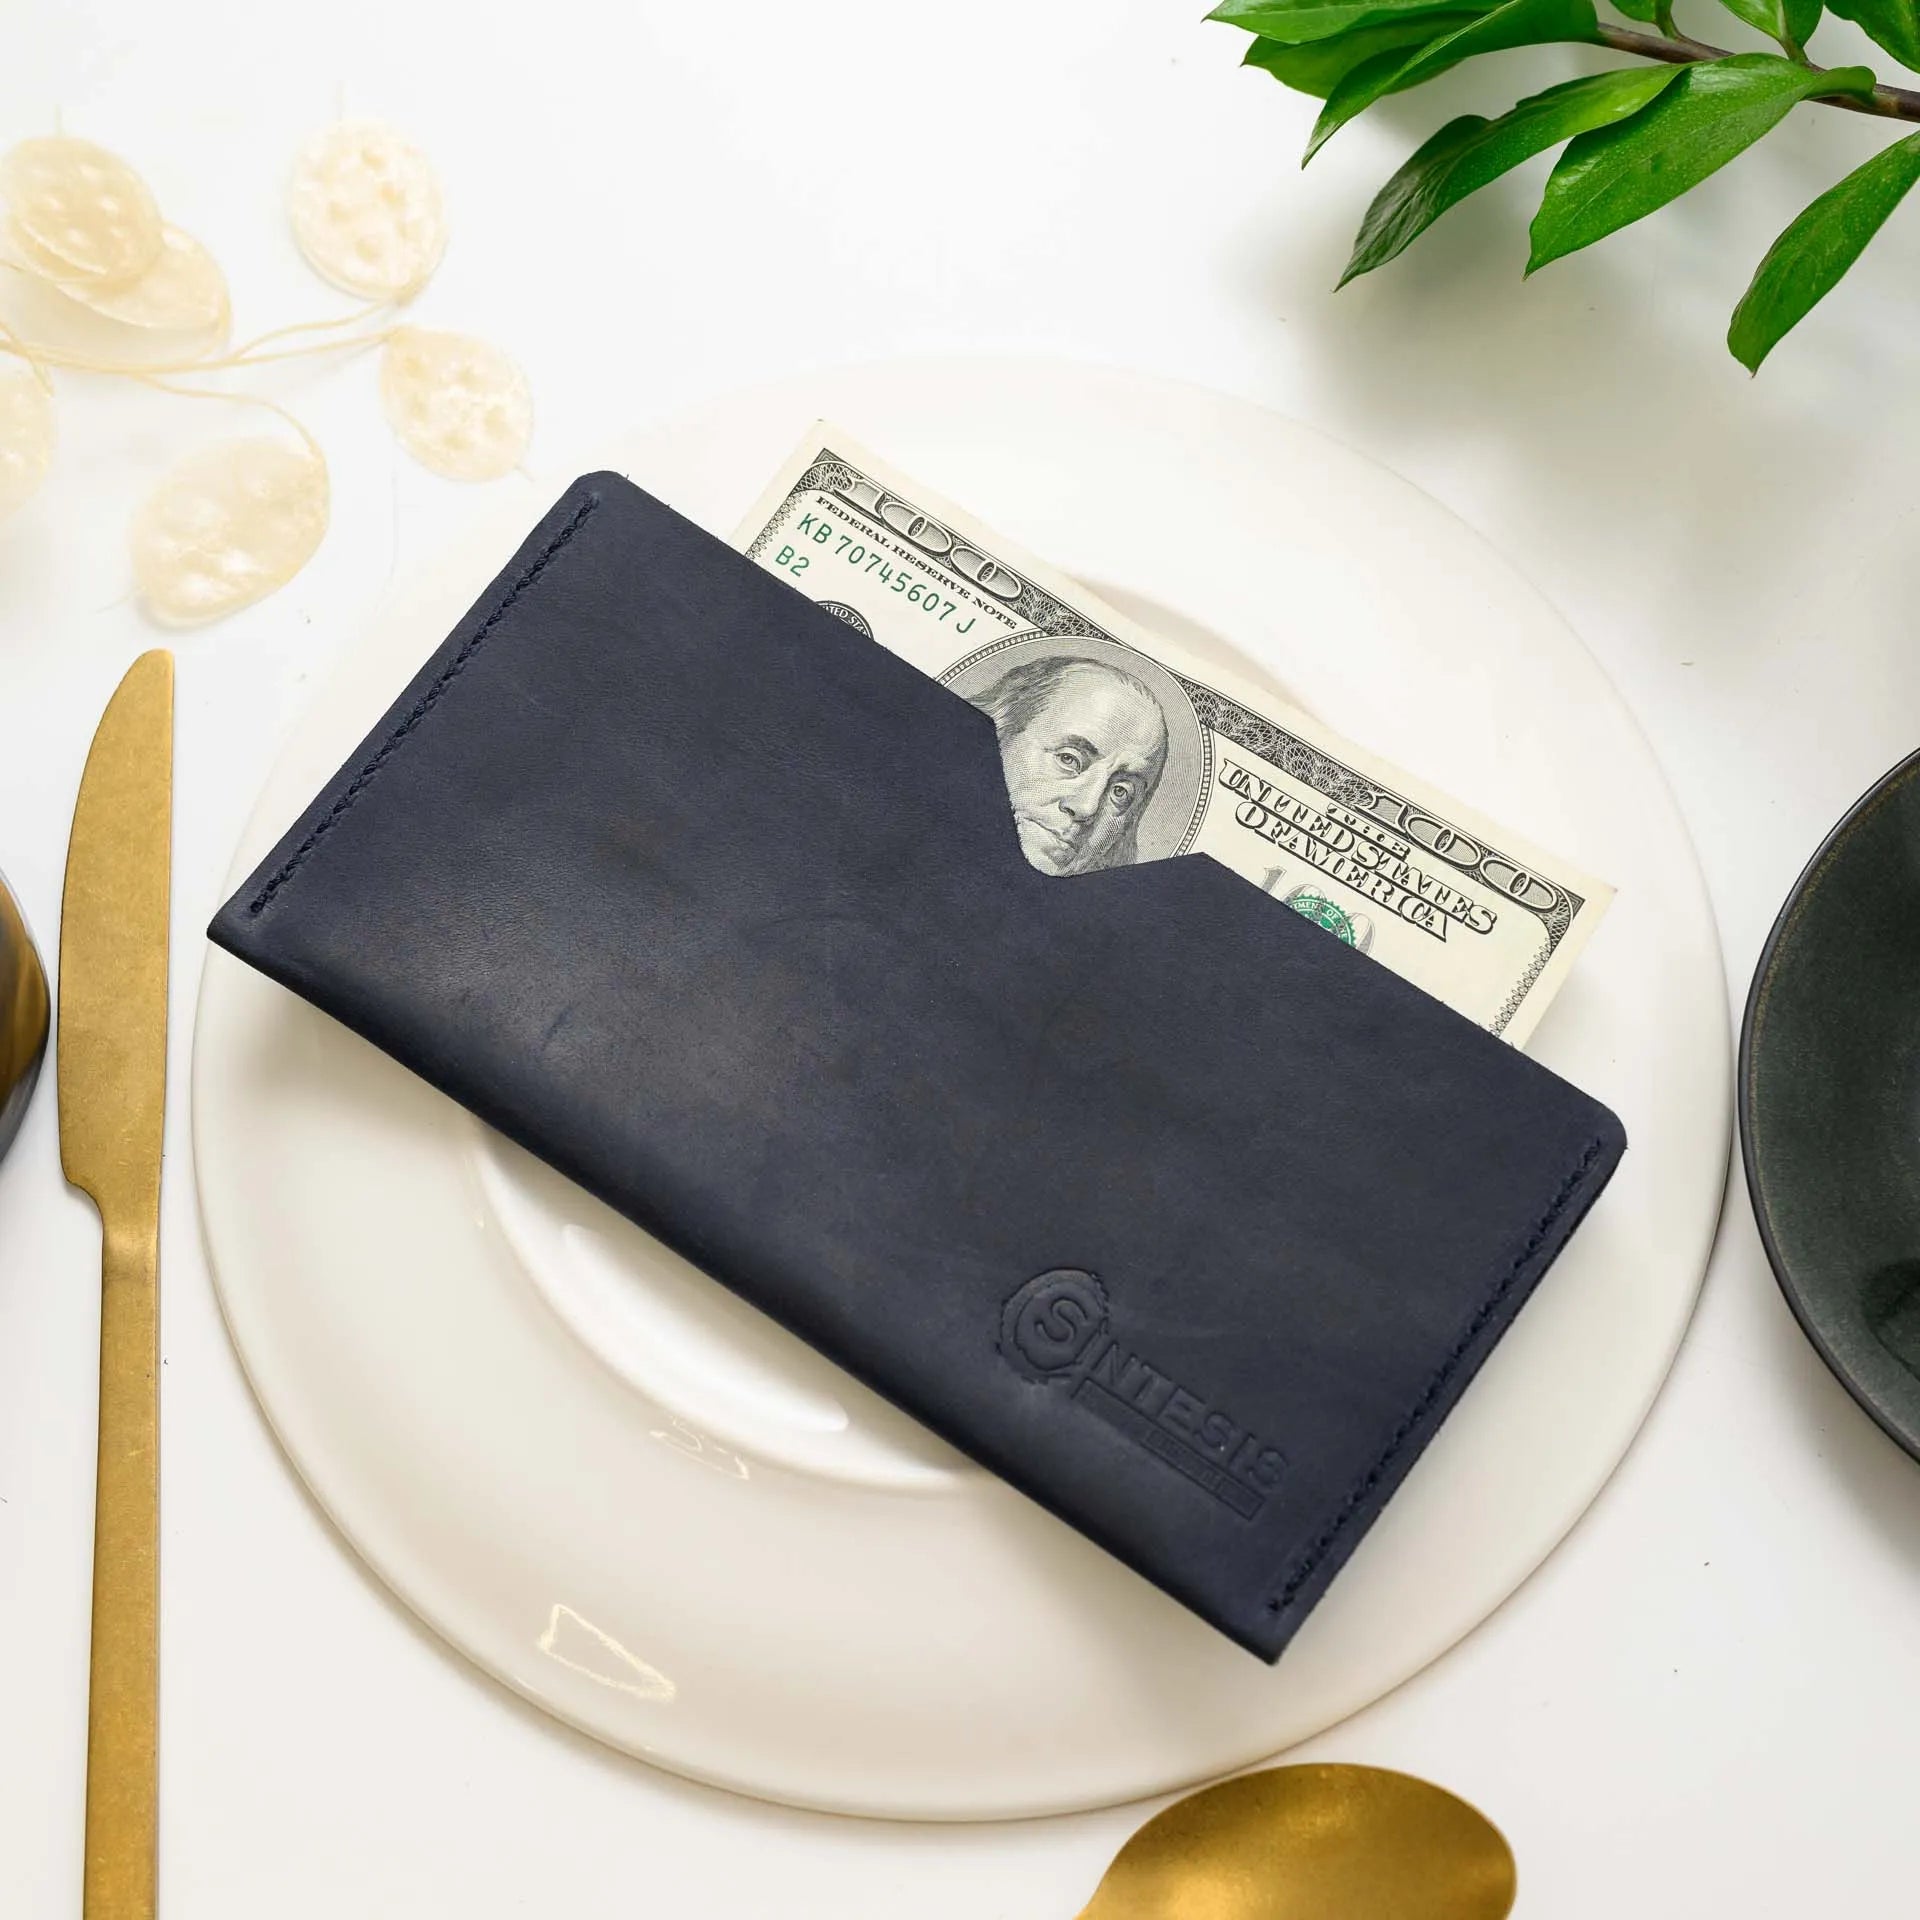 Professional Leather Bill Holder: Ensure smooth transactions with a stylish, custom leather bill holder.